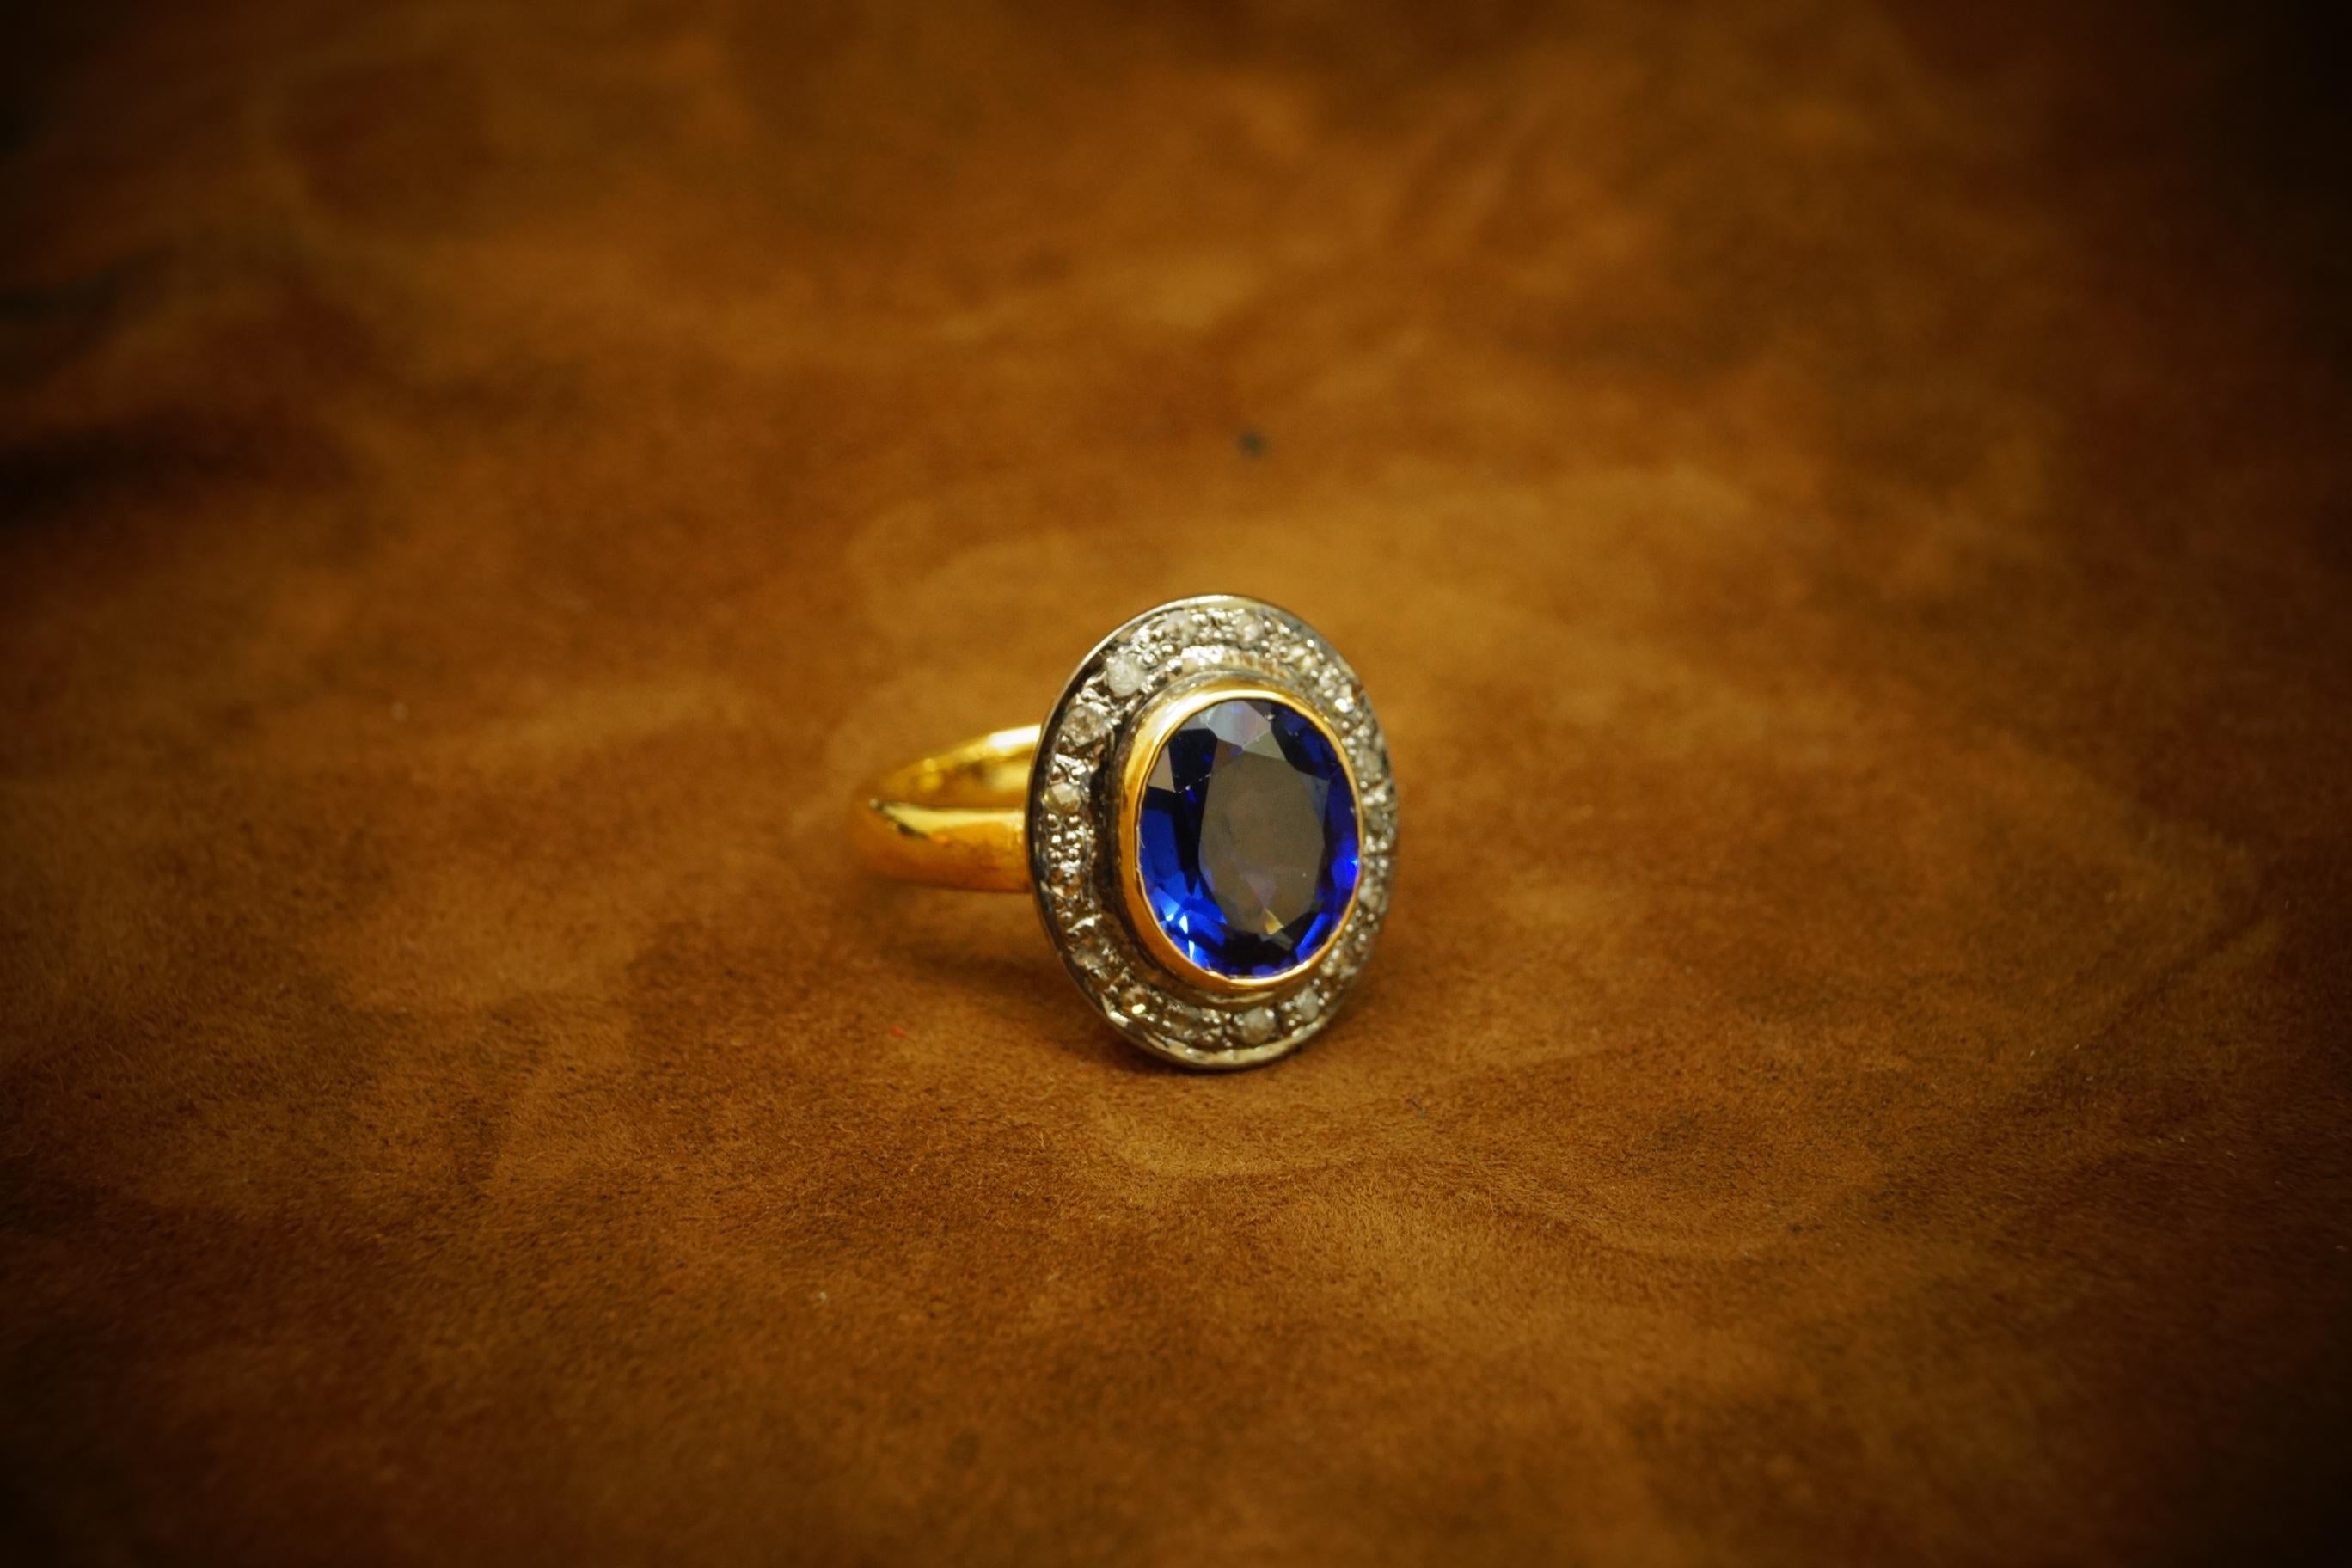 Edwardian Royal Ring Natural uncut diamonds sterling silver Blue Sapphire statement ring For Sale